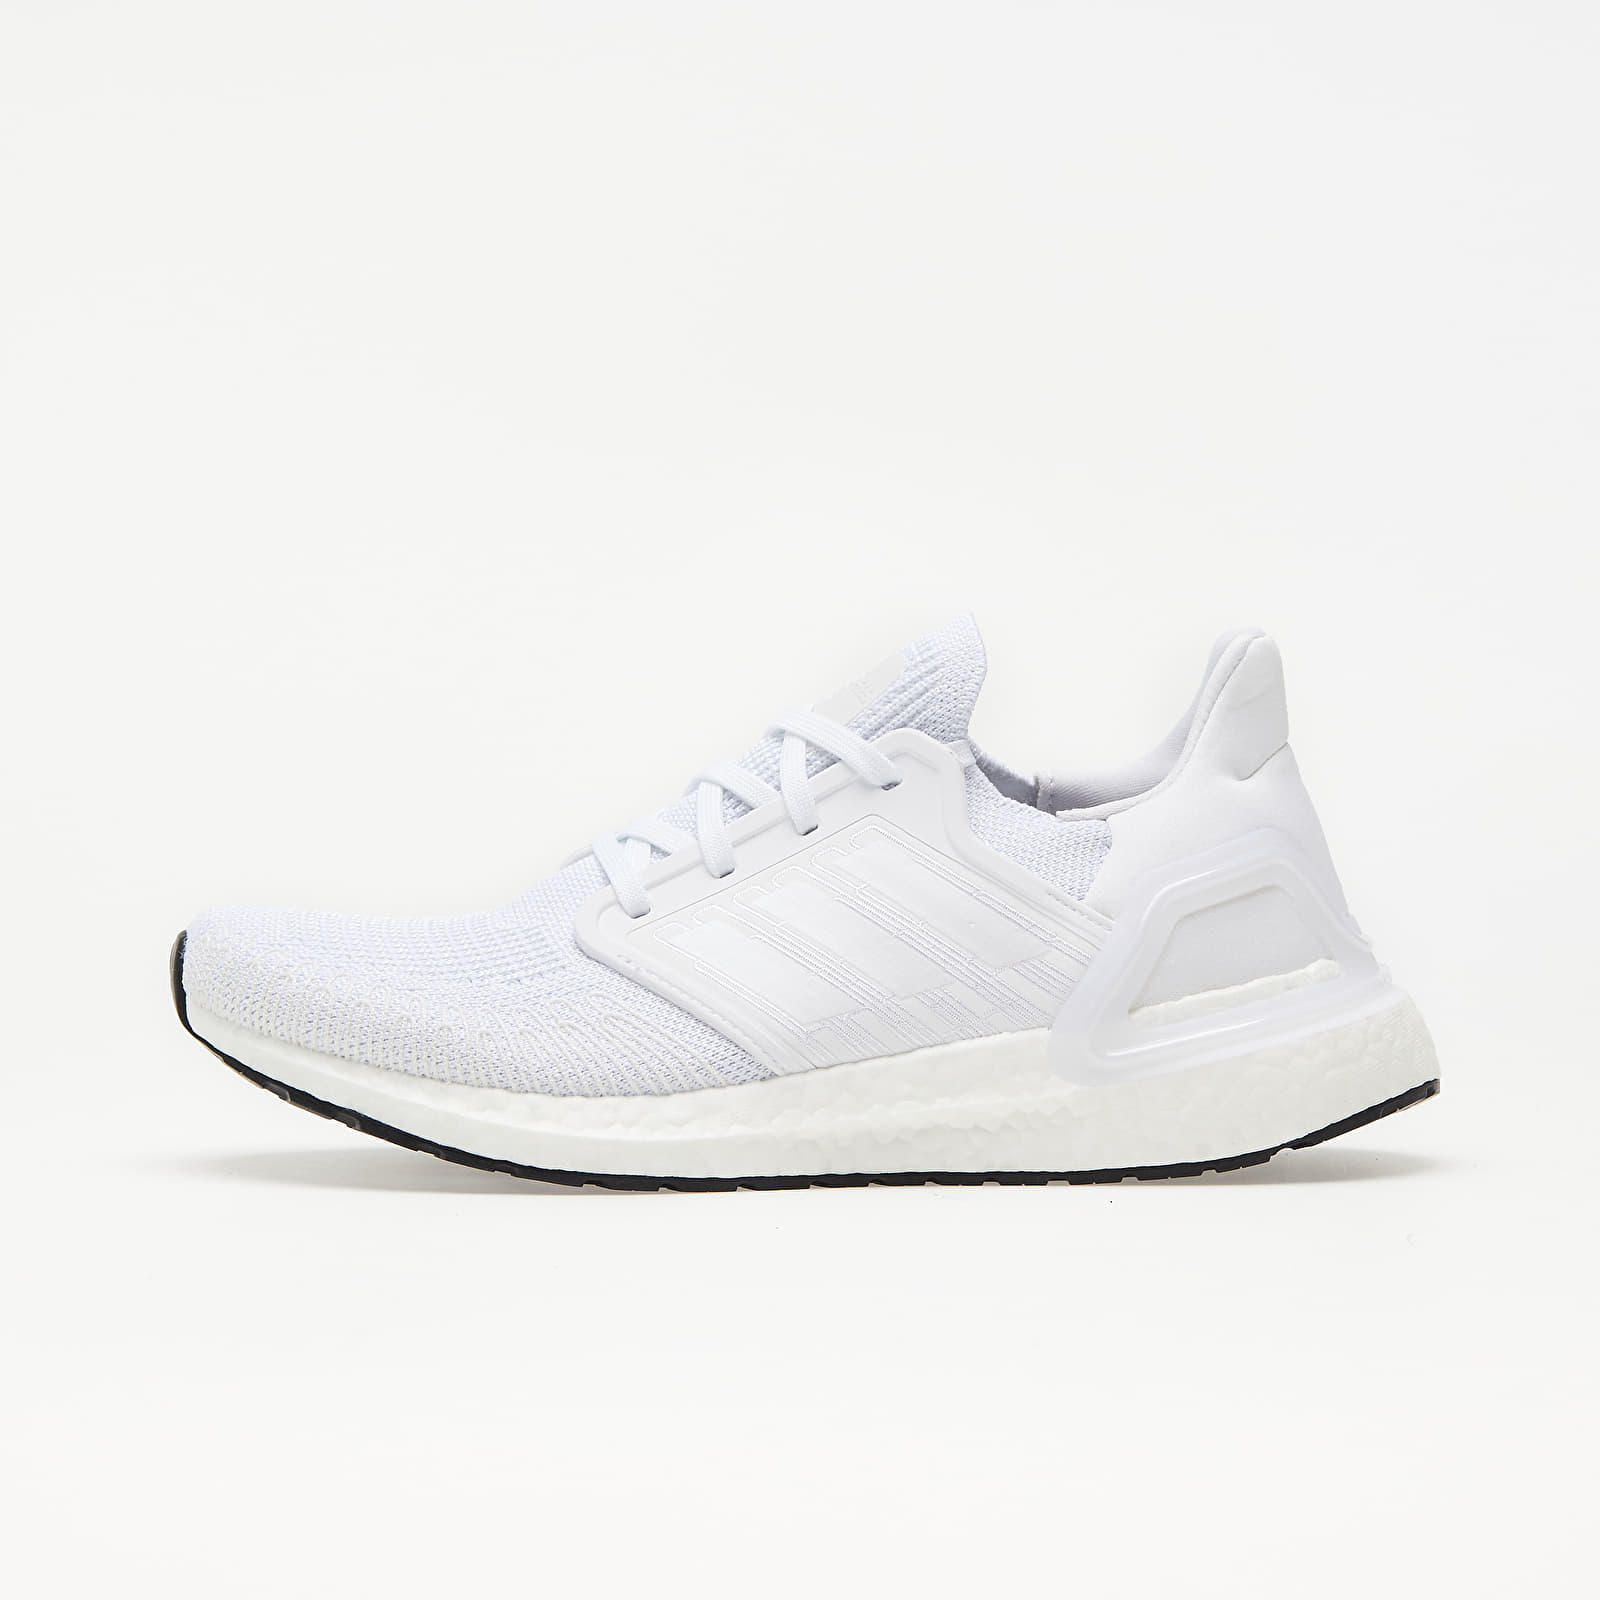 Chaussures et baskets homme adidas UltraBOOST 20 Ftw White/ Ftw White/ Core Black